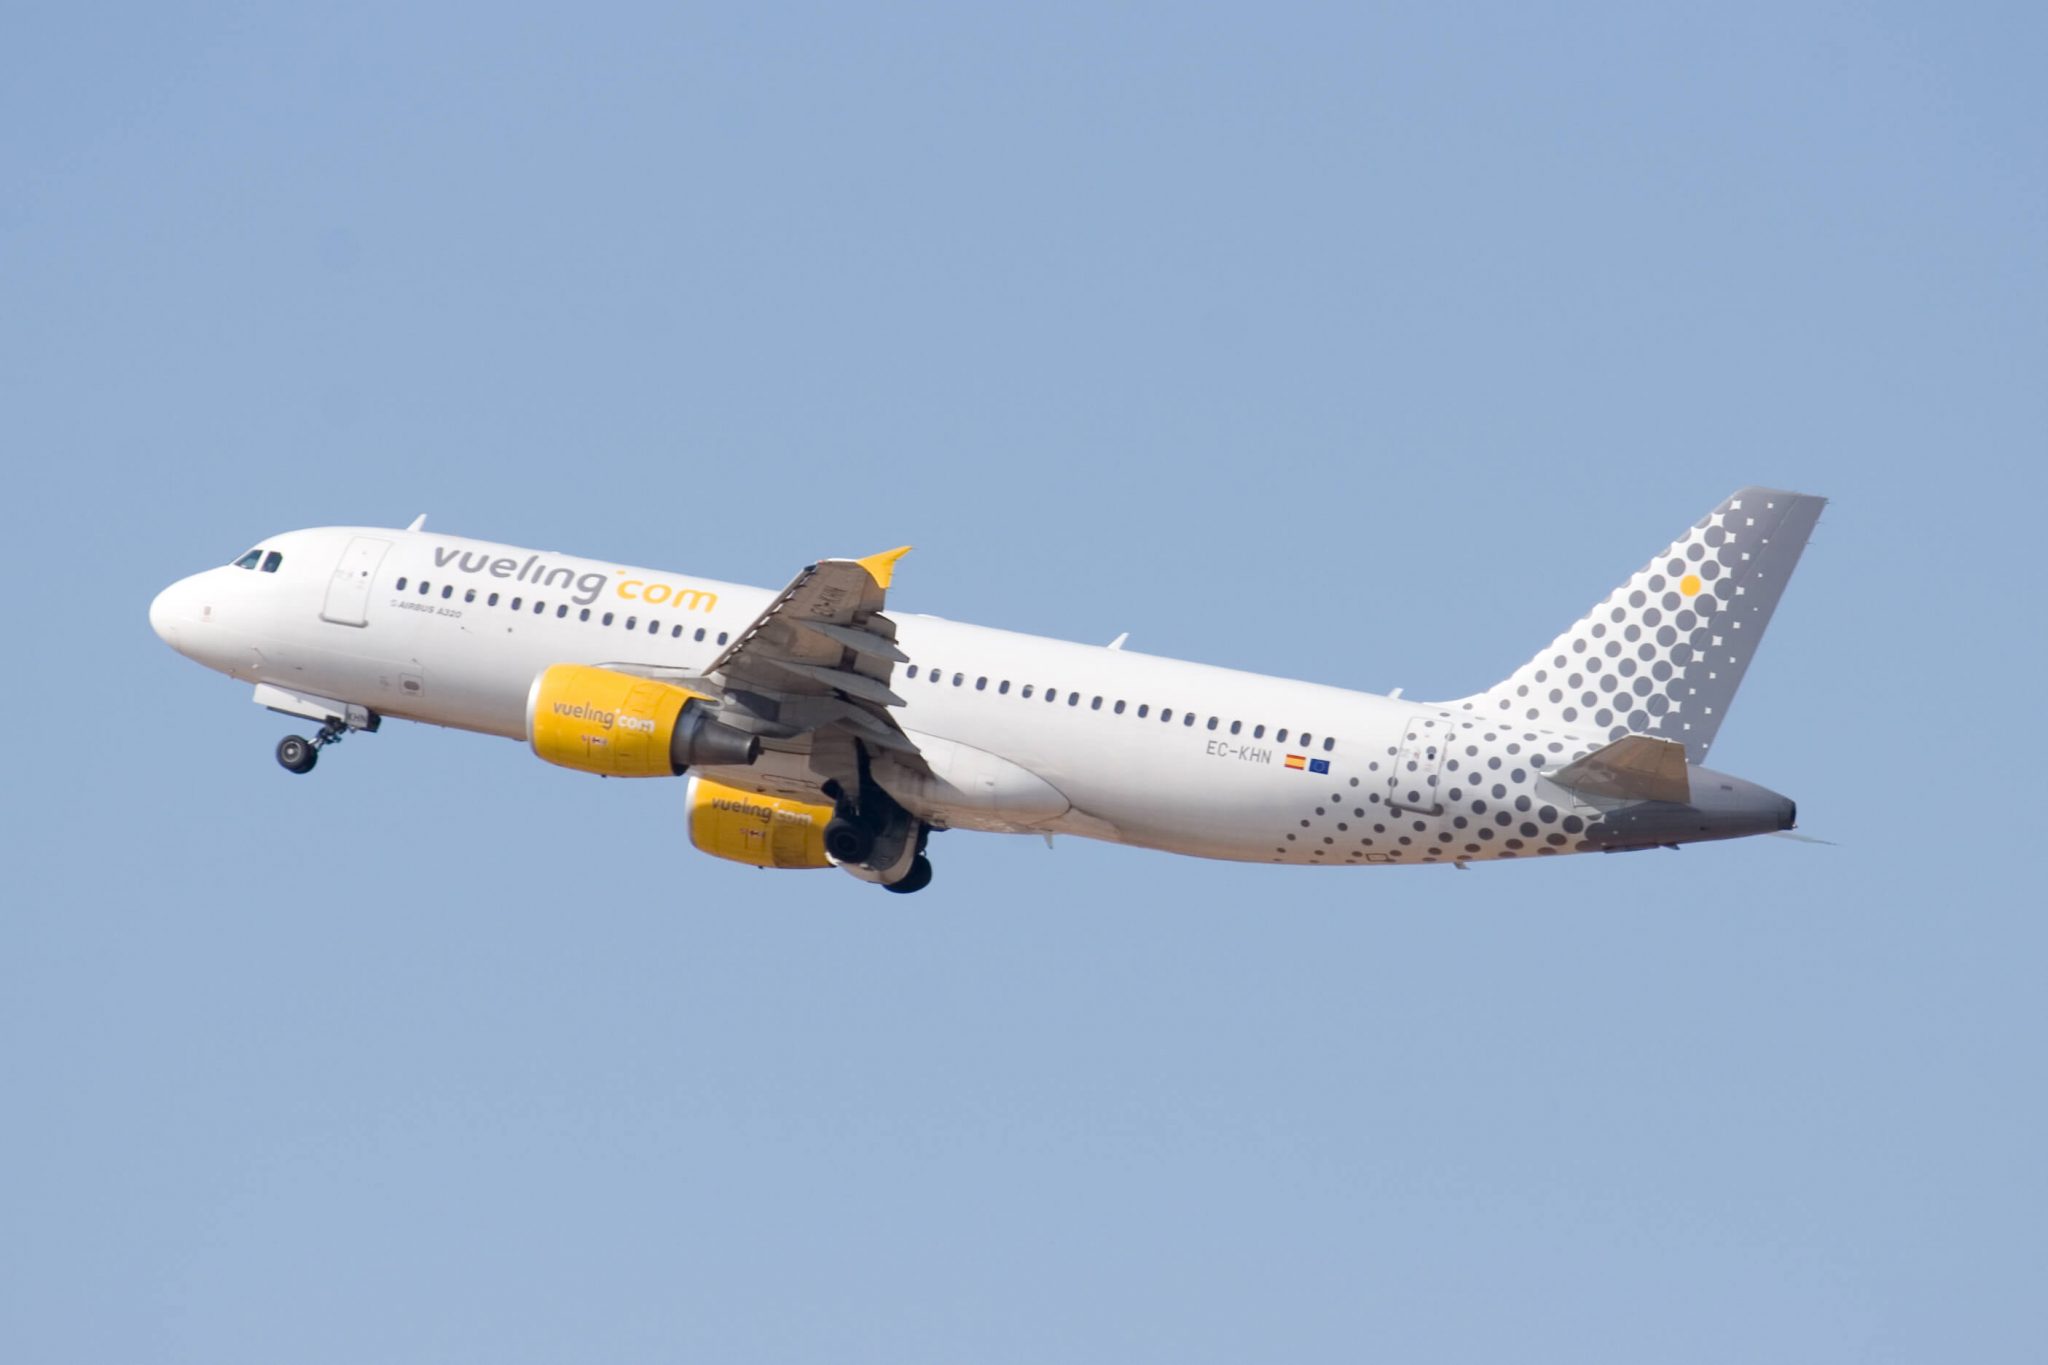 FPG and FPG Amentum acquire two Vueling A320-200s for investor customers